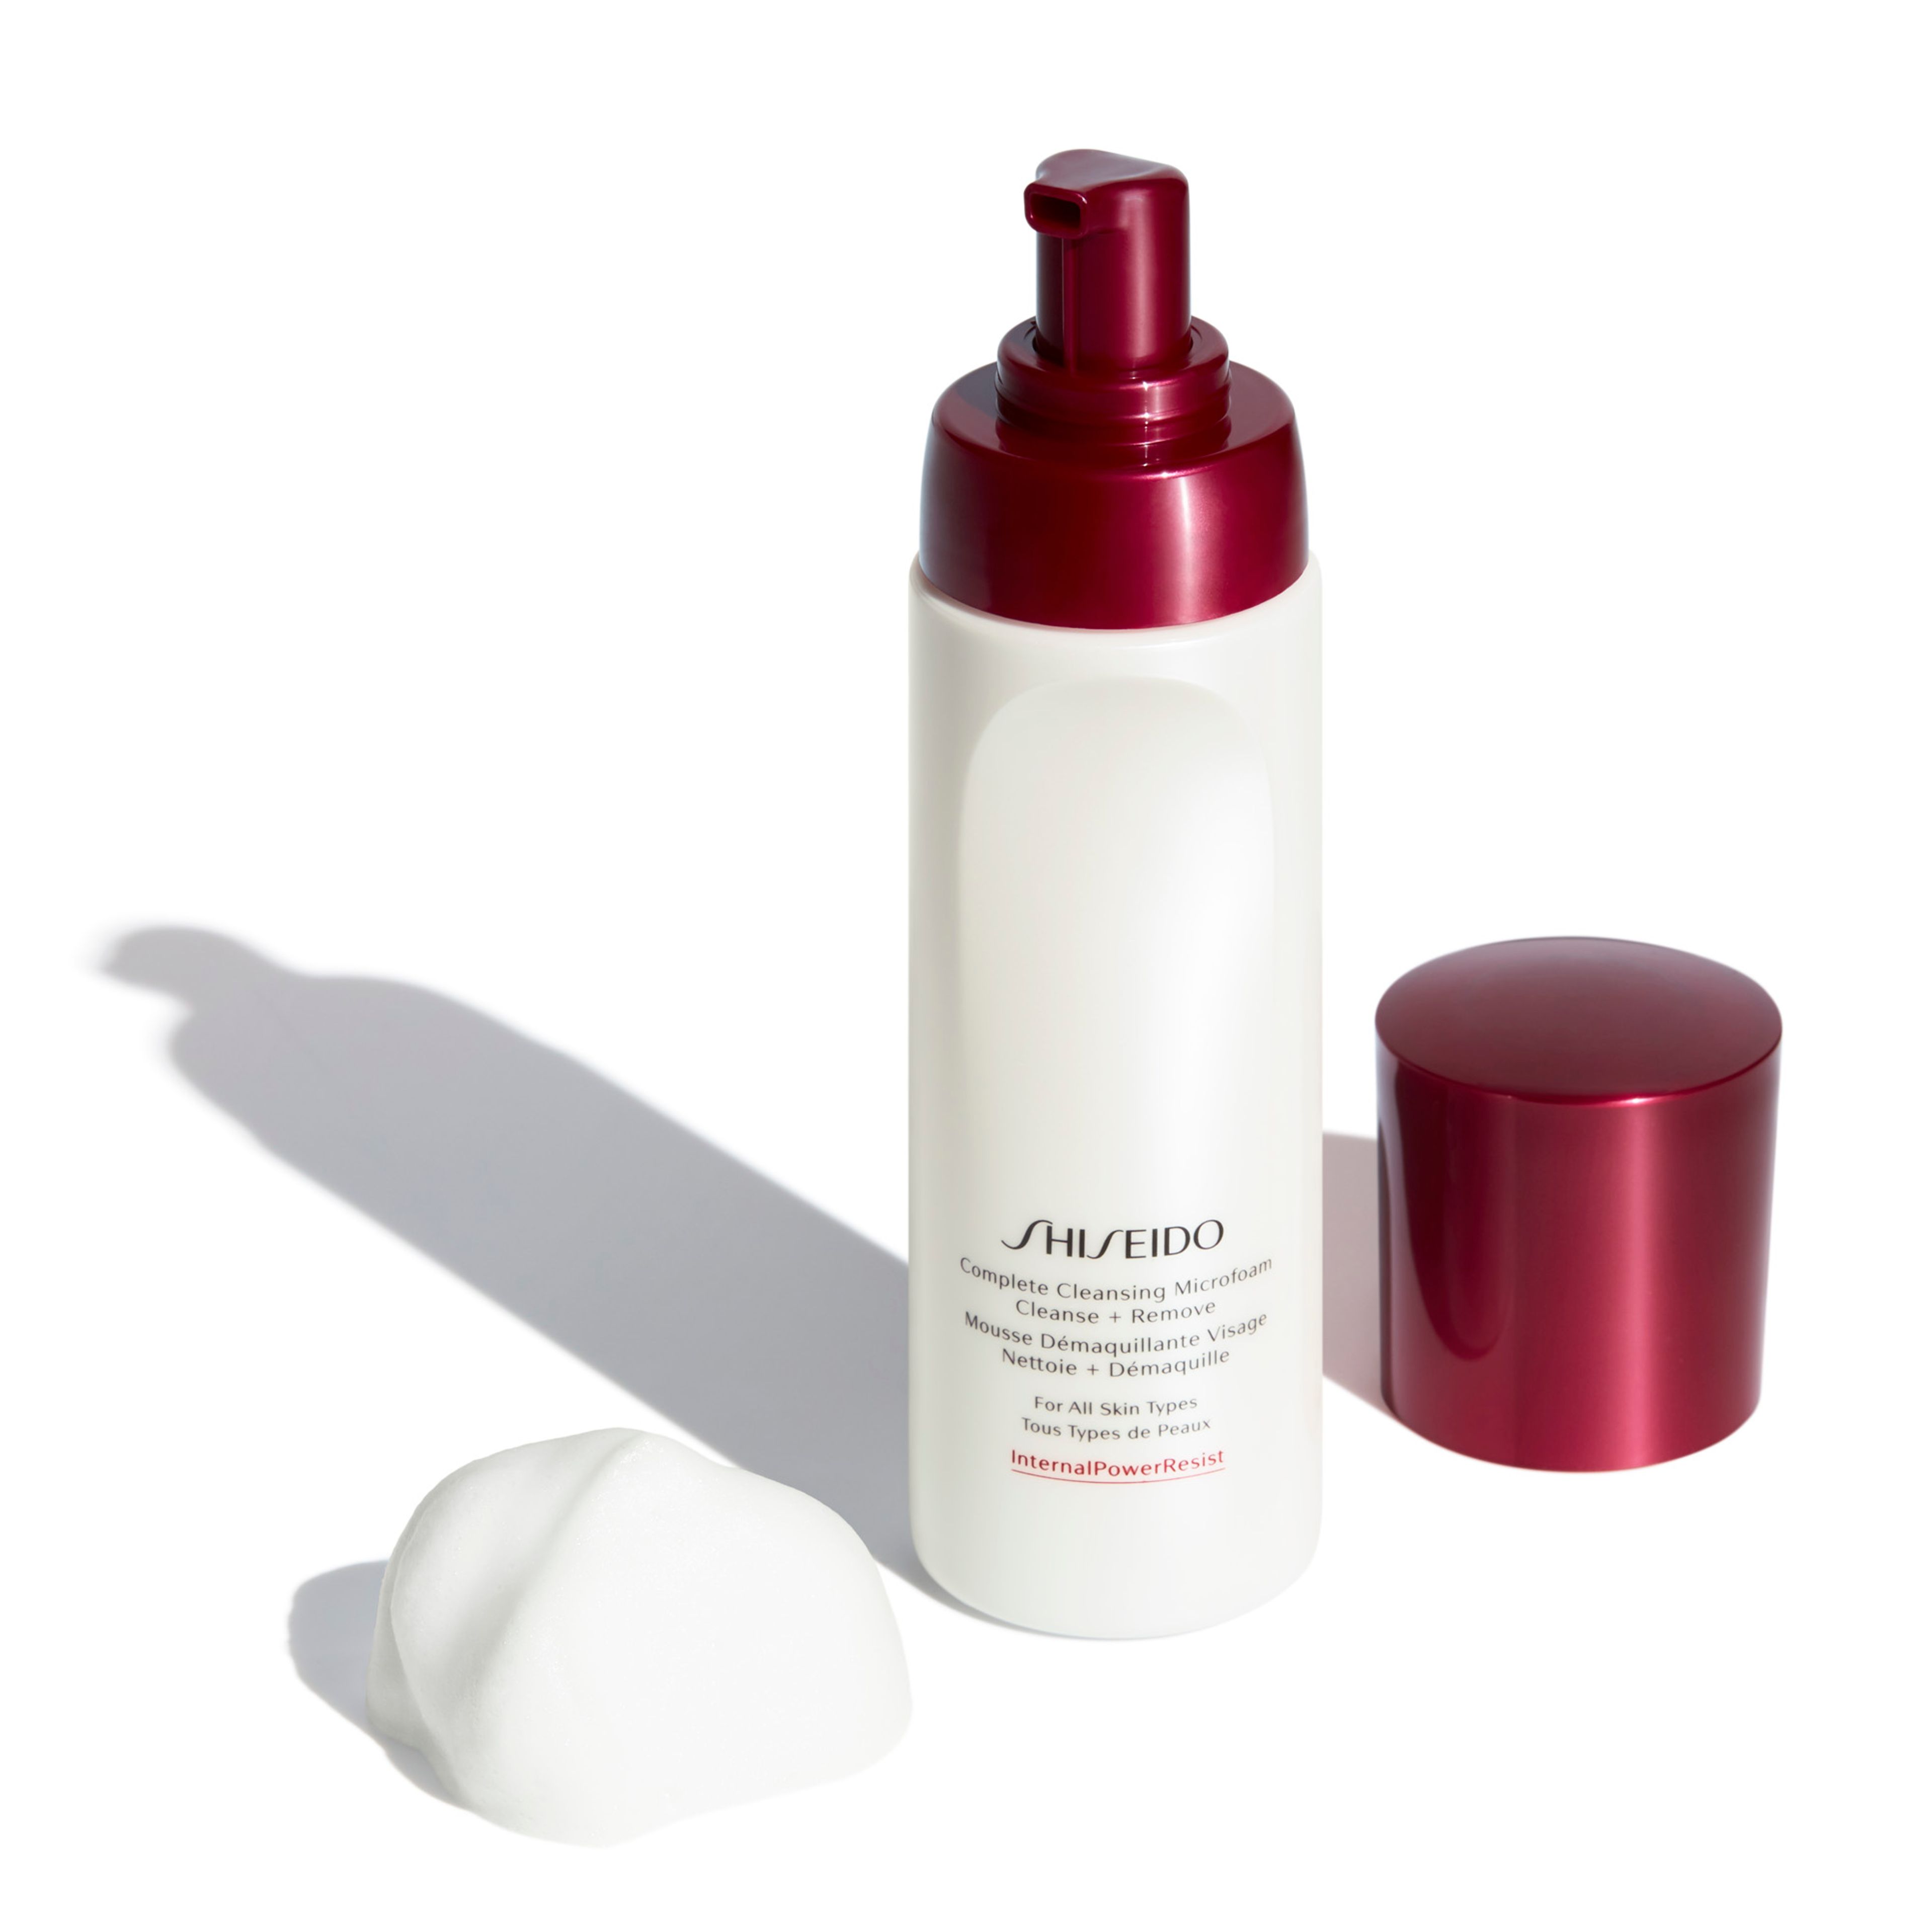 Shiseido Complete Cleansing Microfoam 2